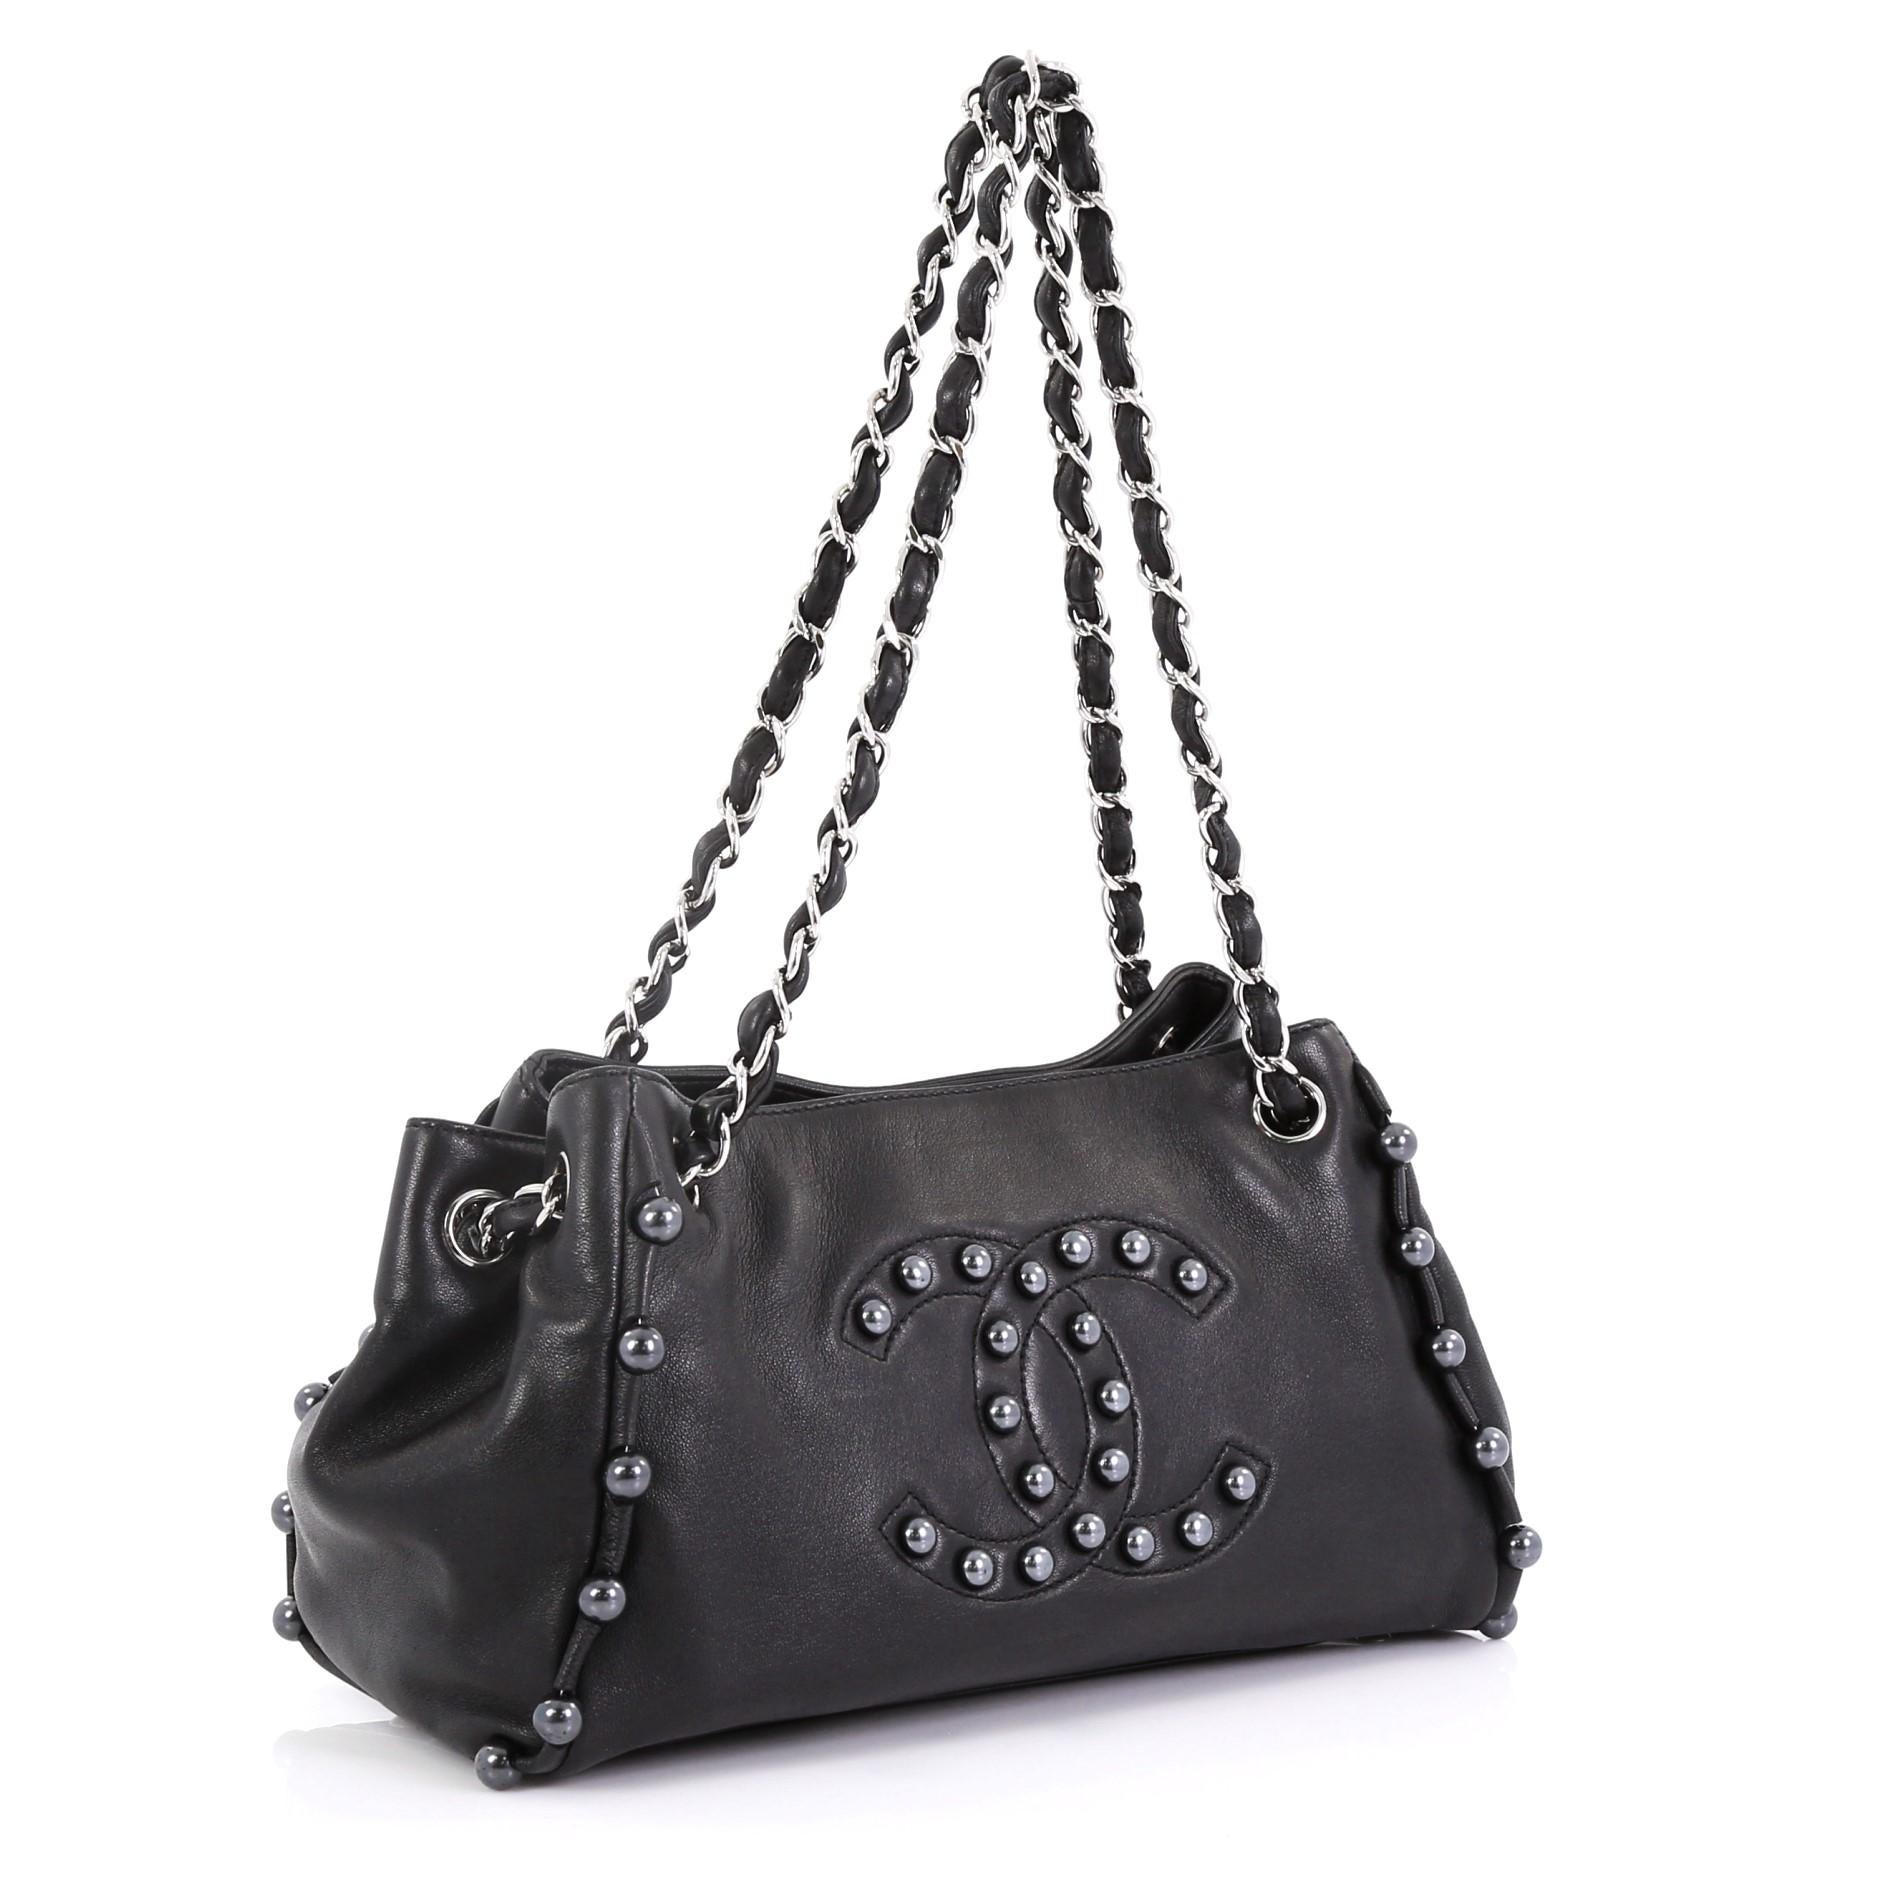 This Chanel Pearl Obsession Accordion Tote Lambskin Small, crafted from black lambskin leather, features woven-in leather chain link straps, CC logo and faux pearl trim details, protective base studs, and silver-tone hardware. Its magnetic snap